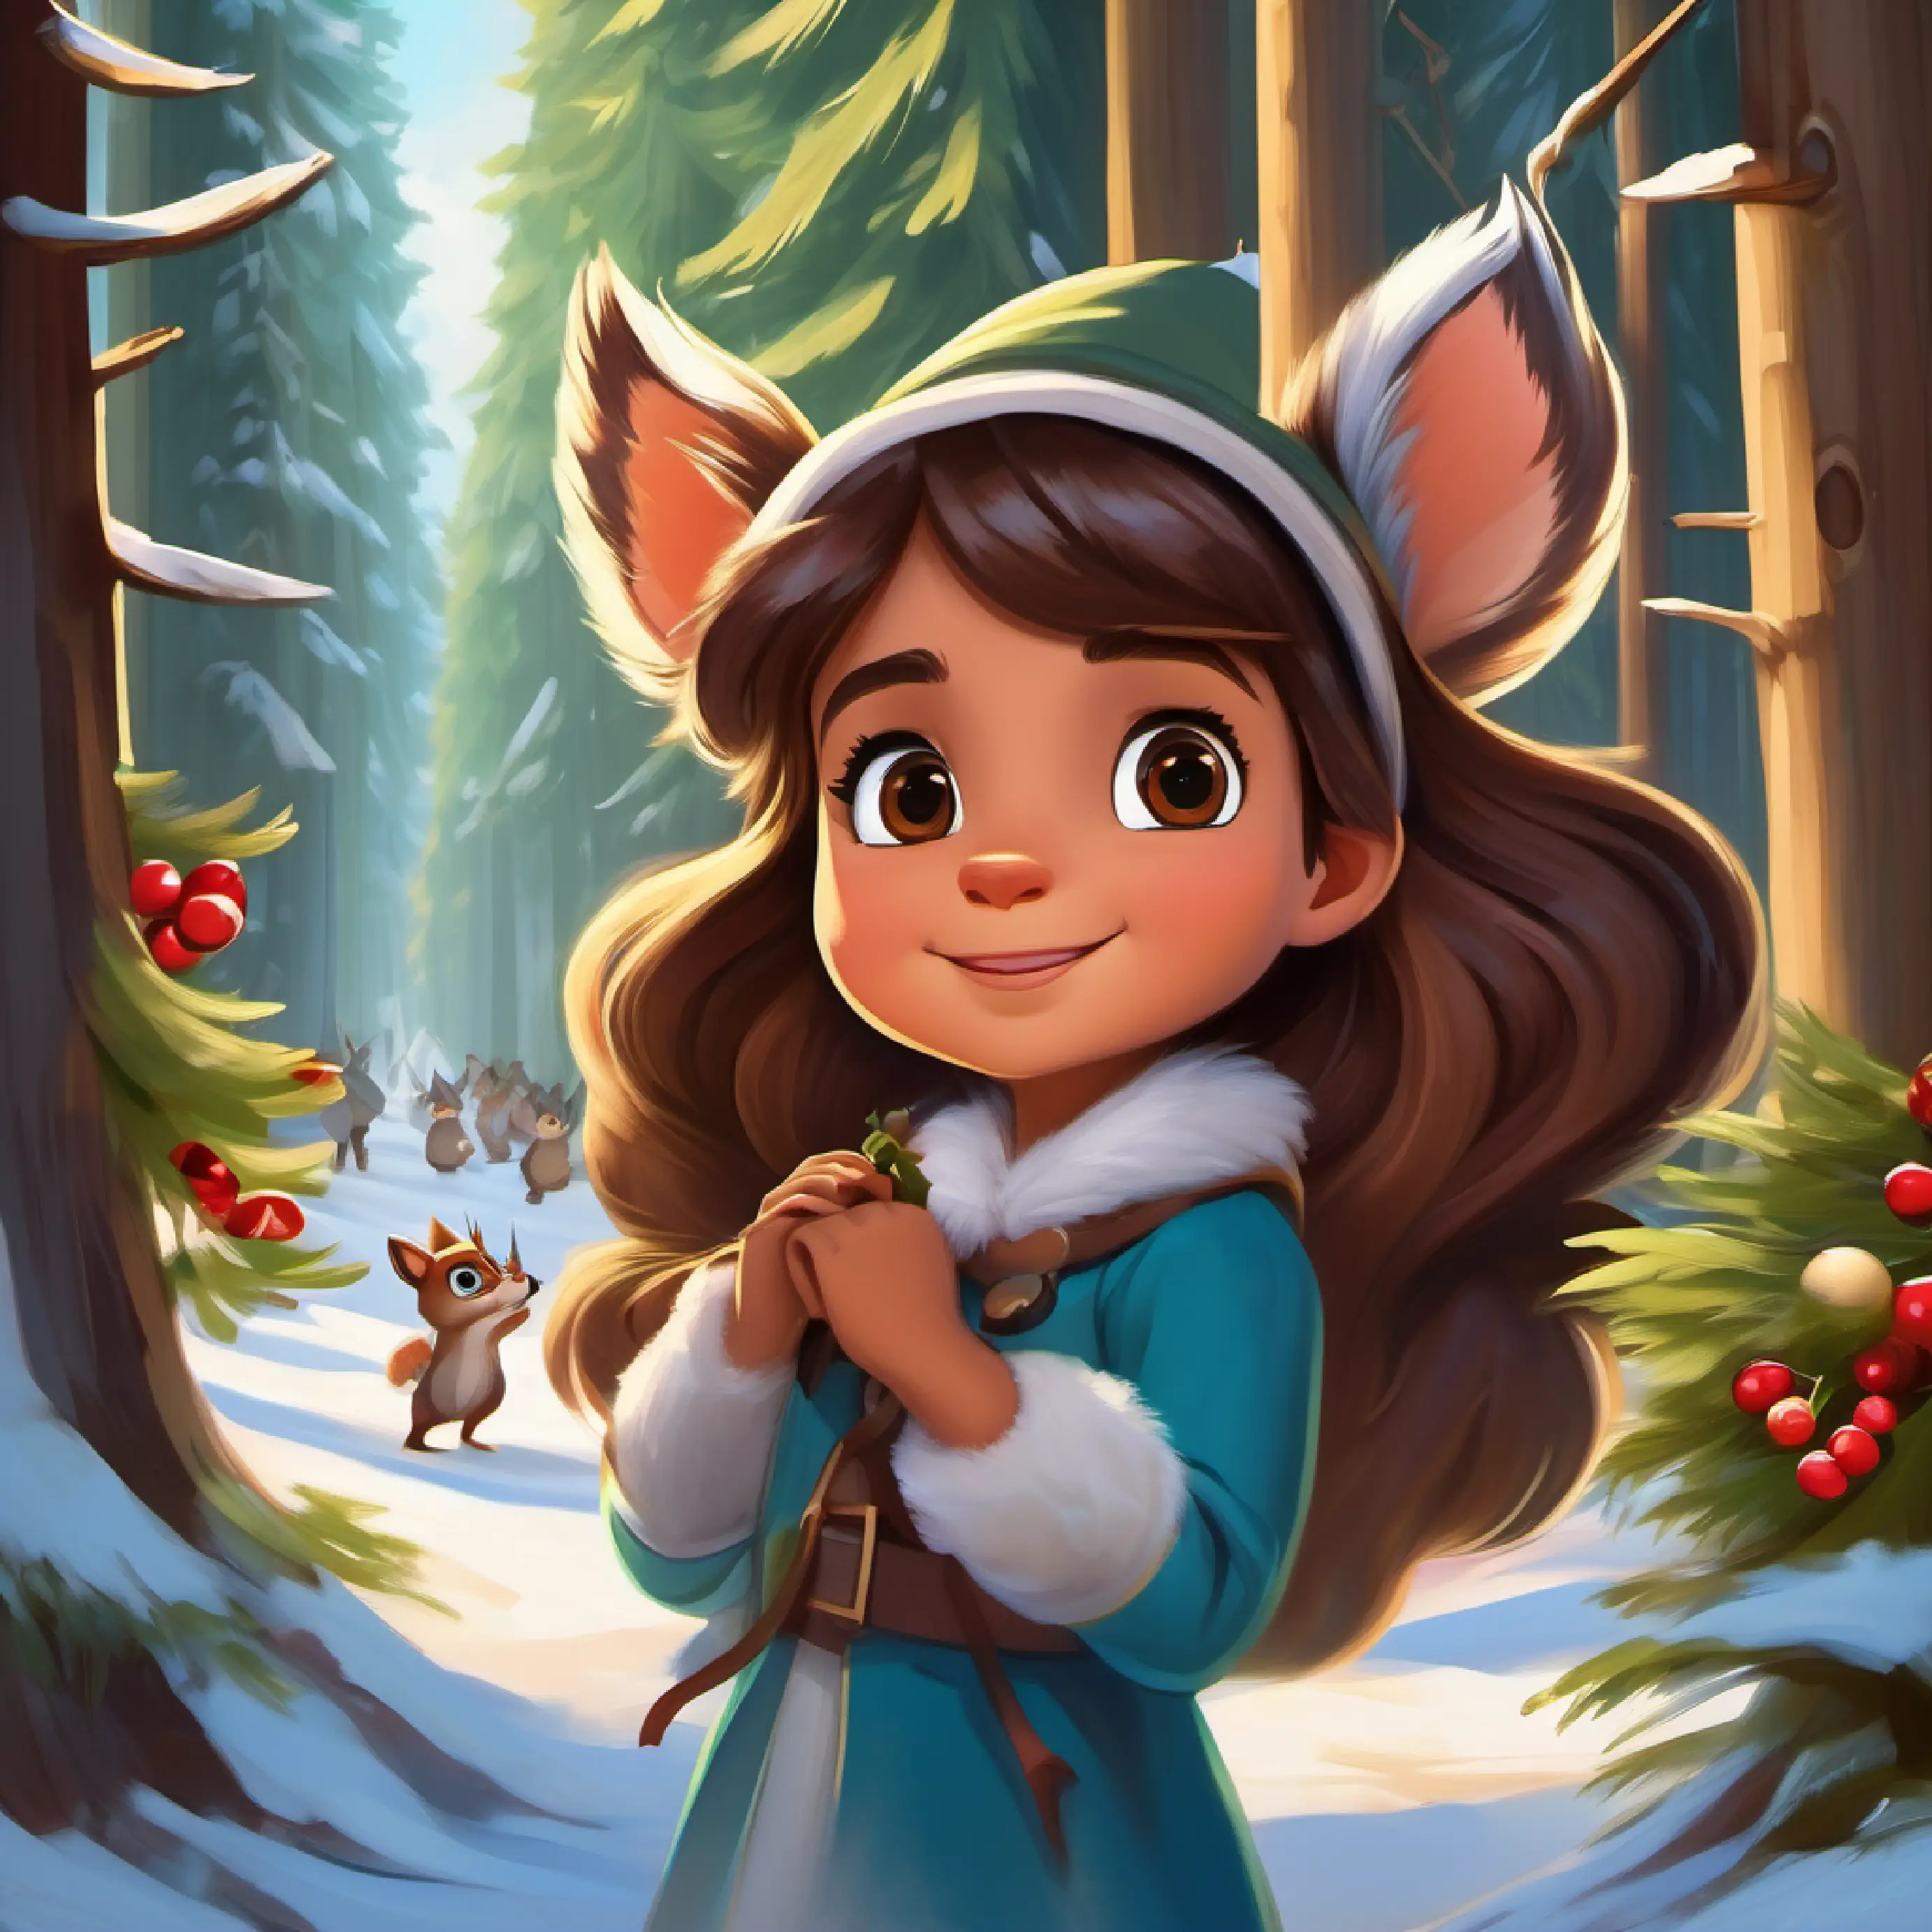 Wisdom of the Whispering Woods guides A spirited, curious girl with brown eyes and tanned skin eager for adventures, with Chatty, clever squirrel with bushy tail, bright eyes, and a knack for riddles interpreting.